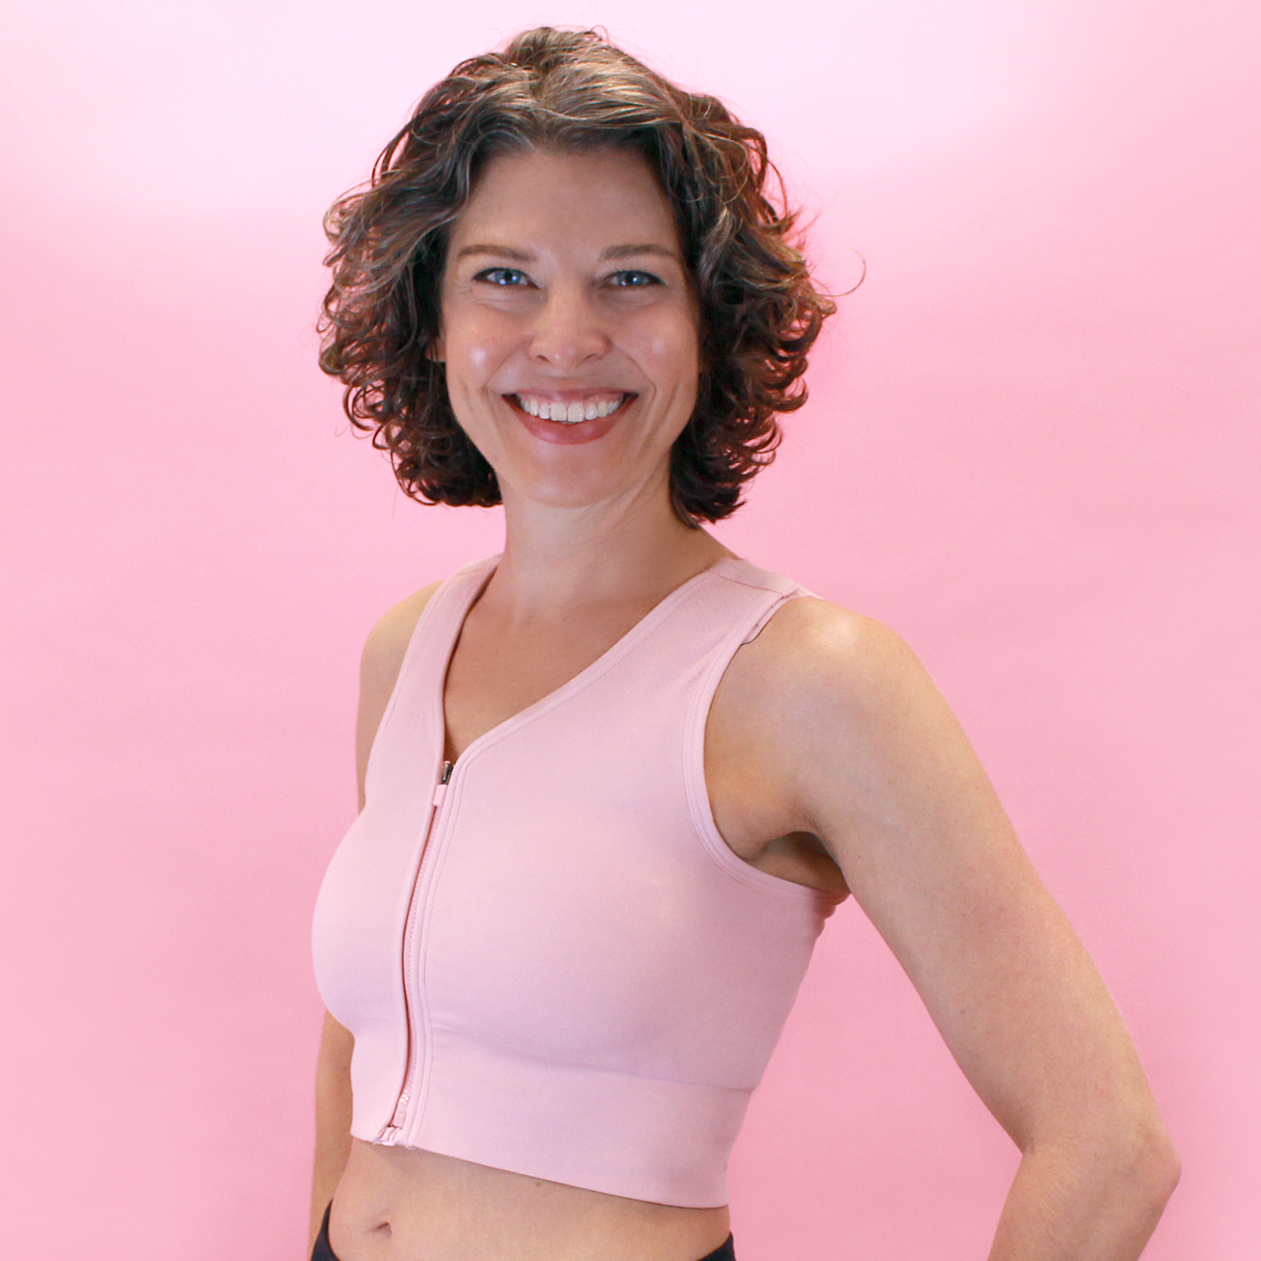 American Breast Care Active Recovery Bra Pink